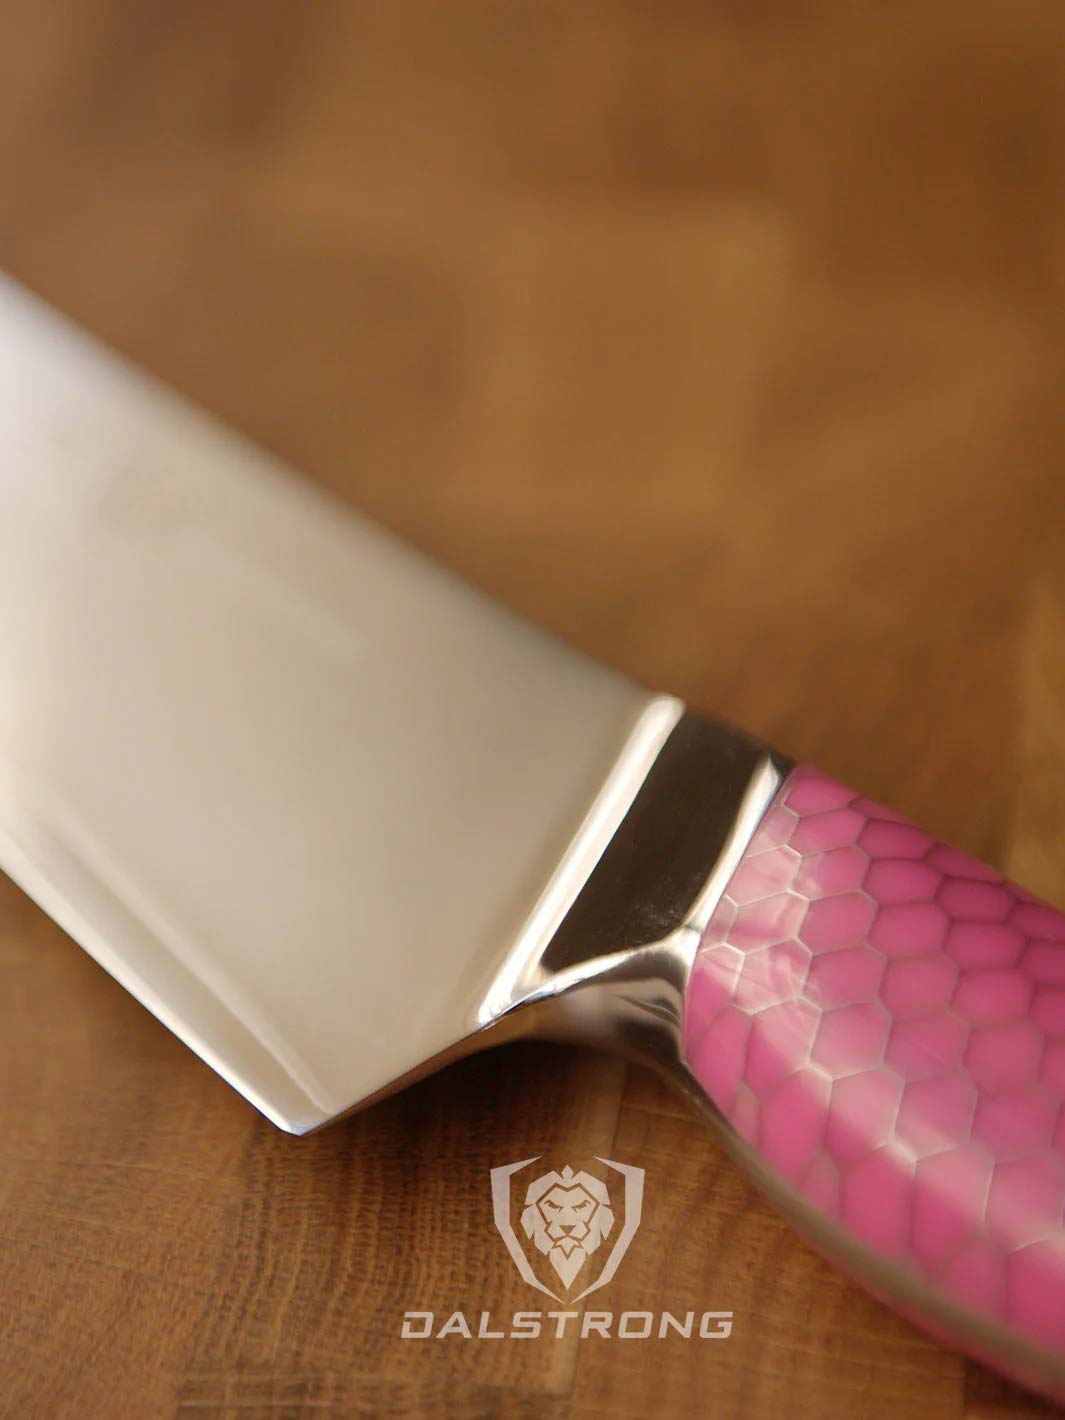 Dalstrong frost fire series 8 inch chef knife with pink handle featuring it's ergonomic handle.